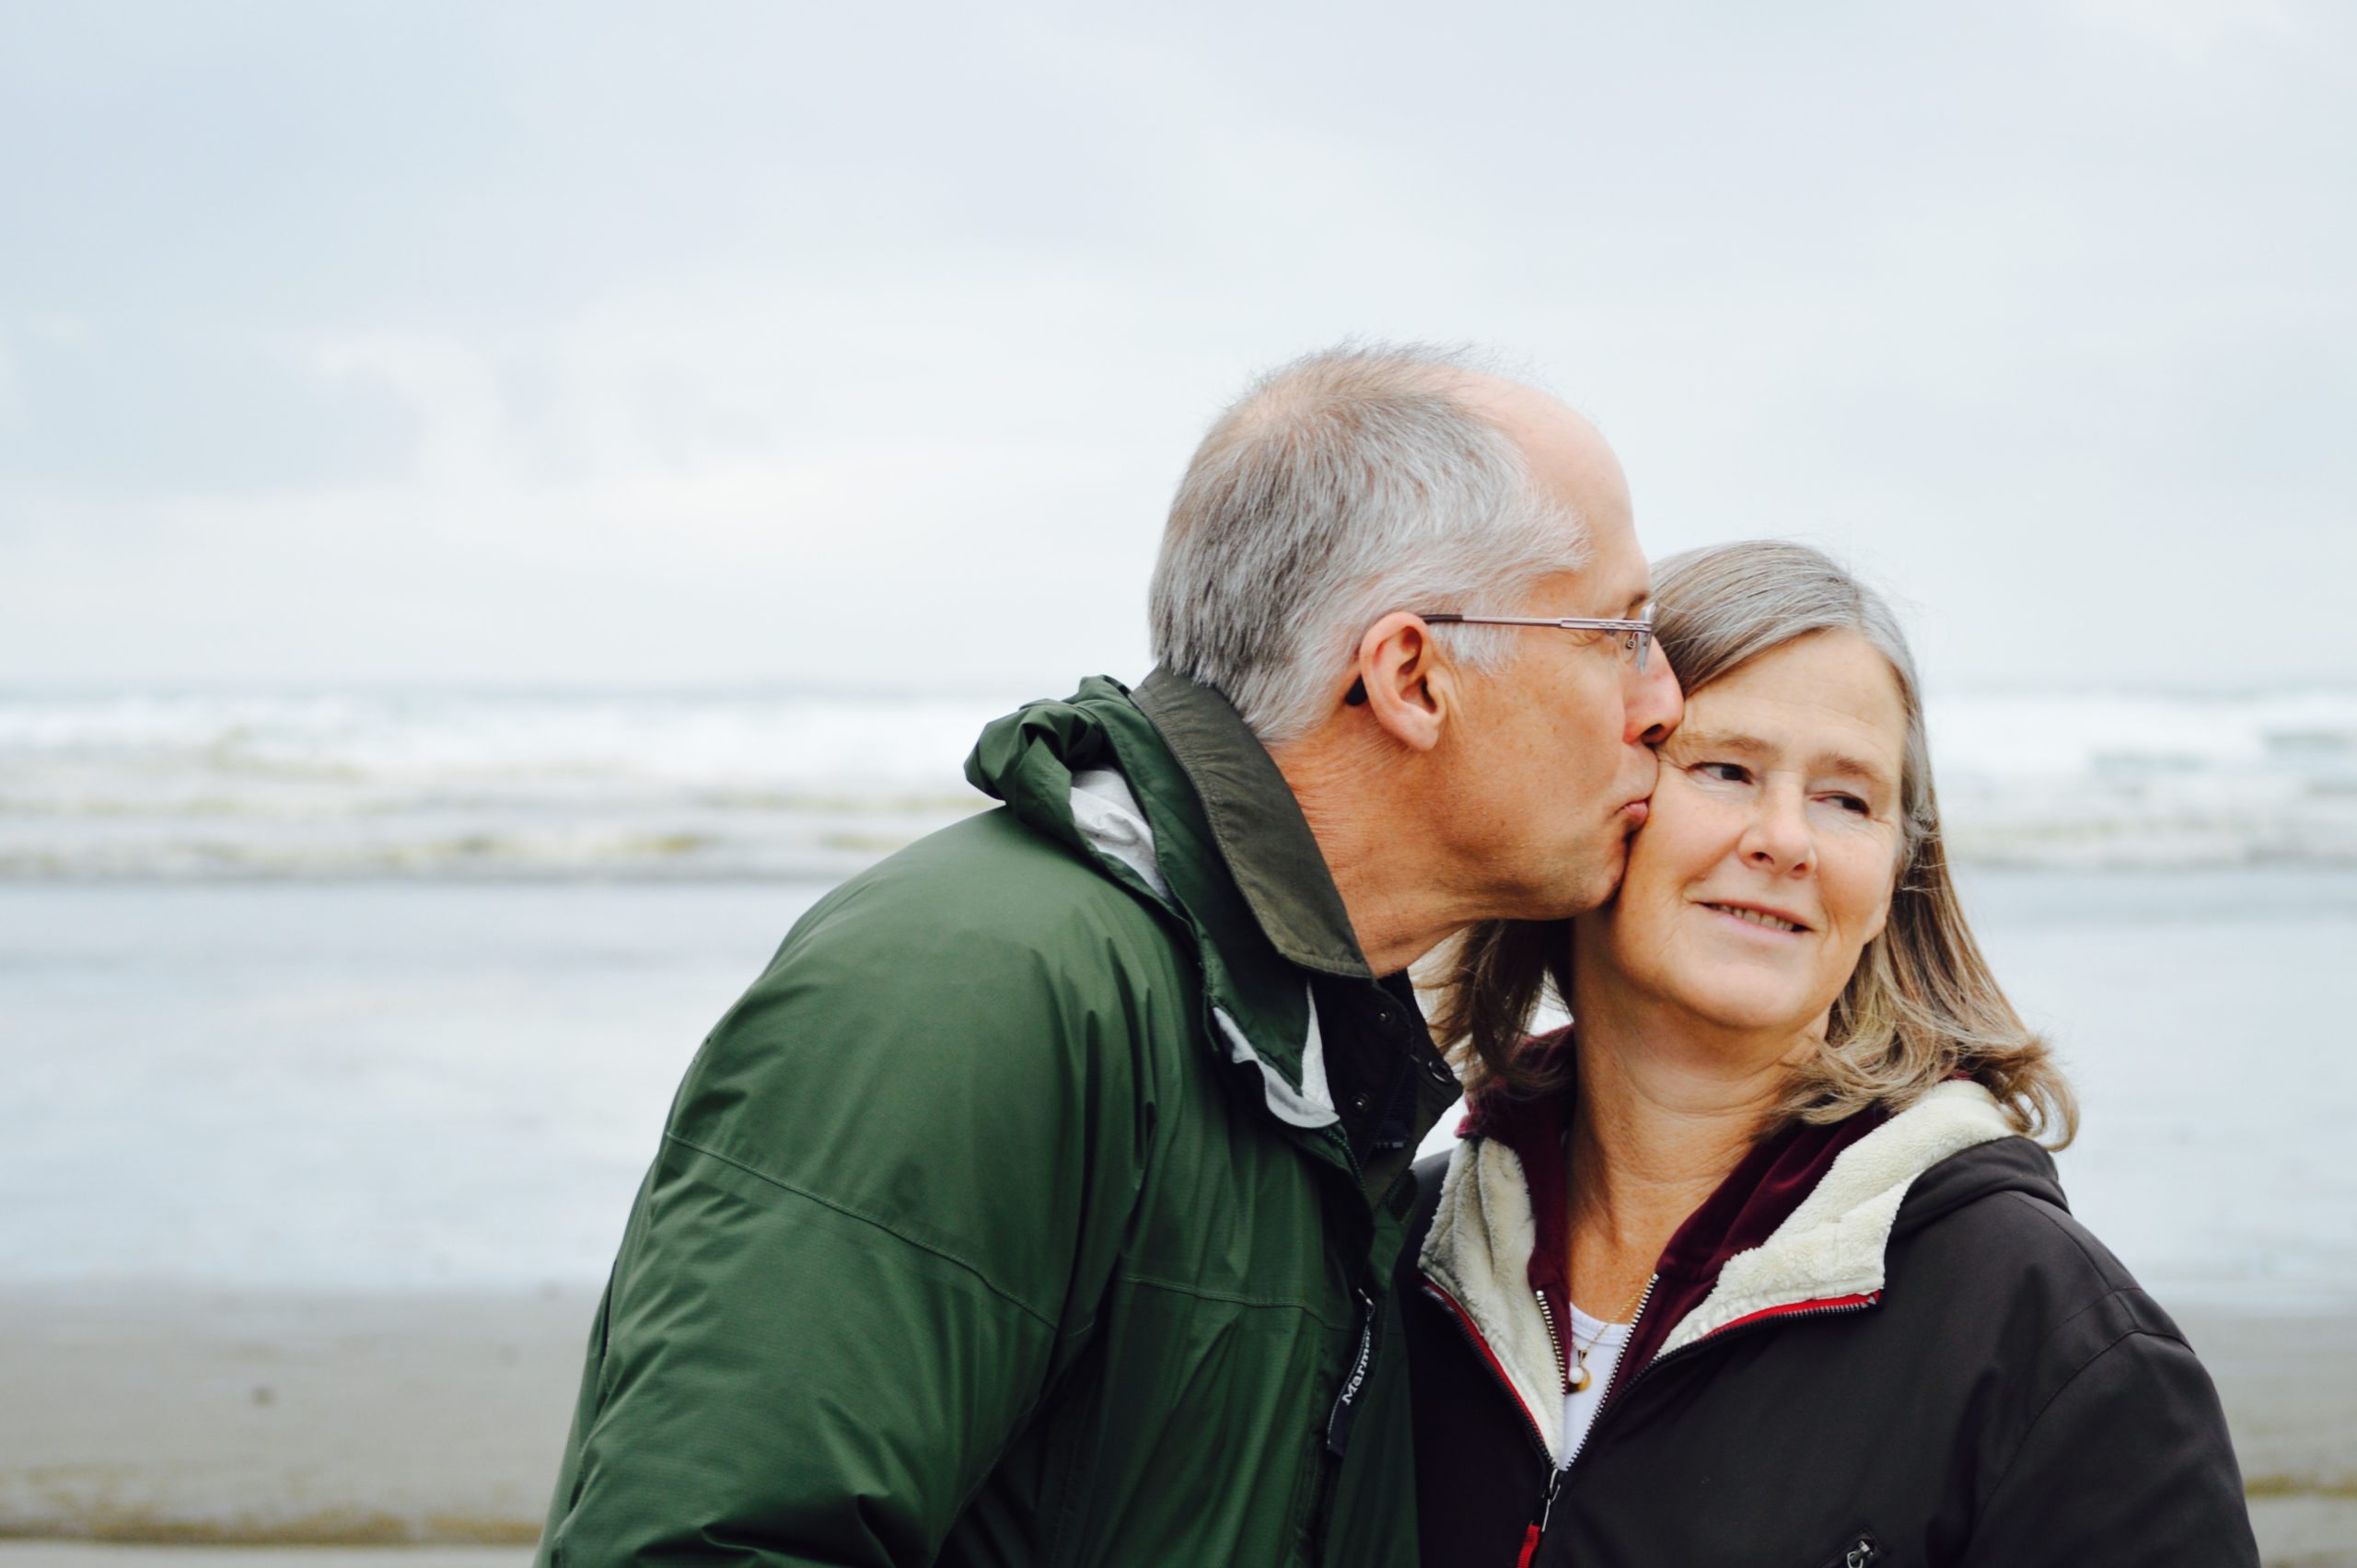 An elderly couple being affectionate at the beach.